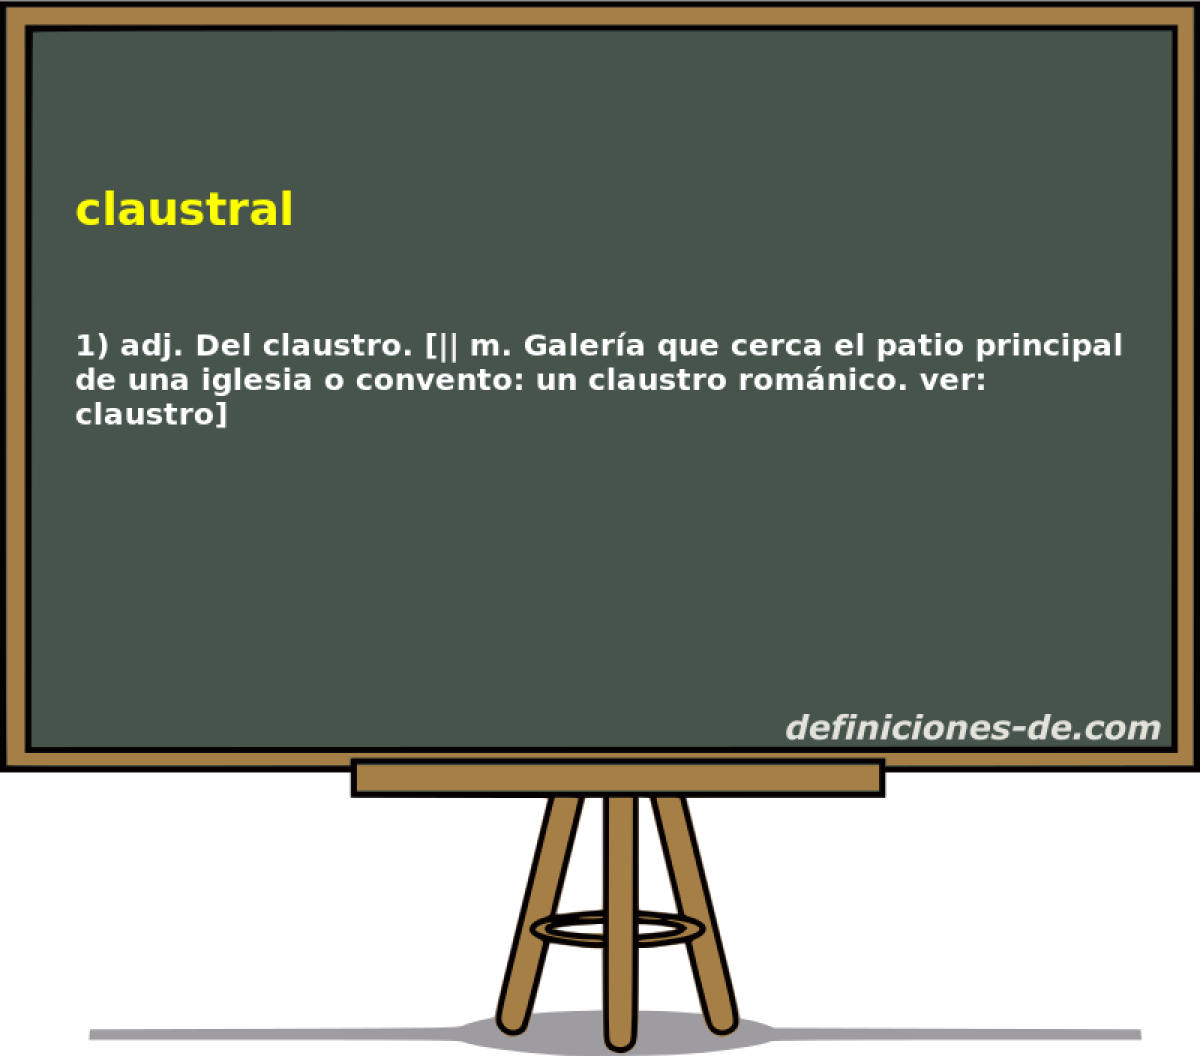 claustral 